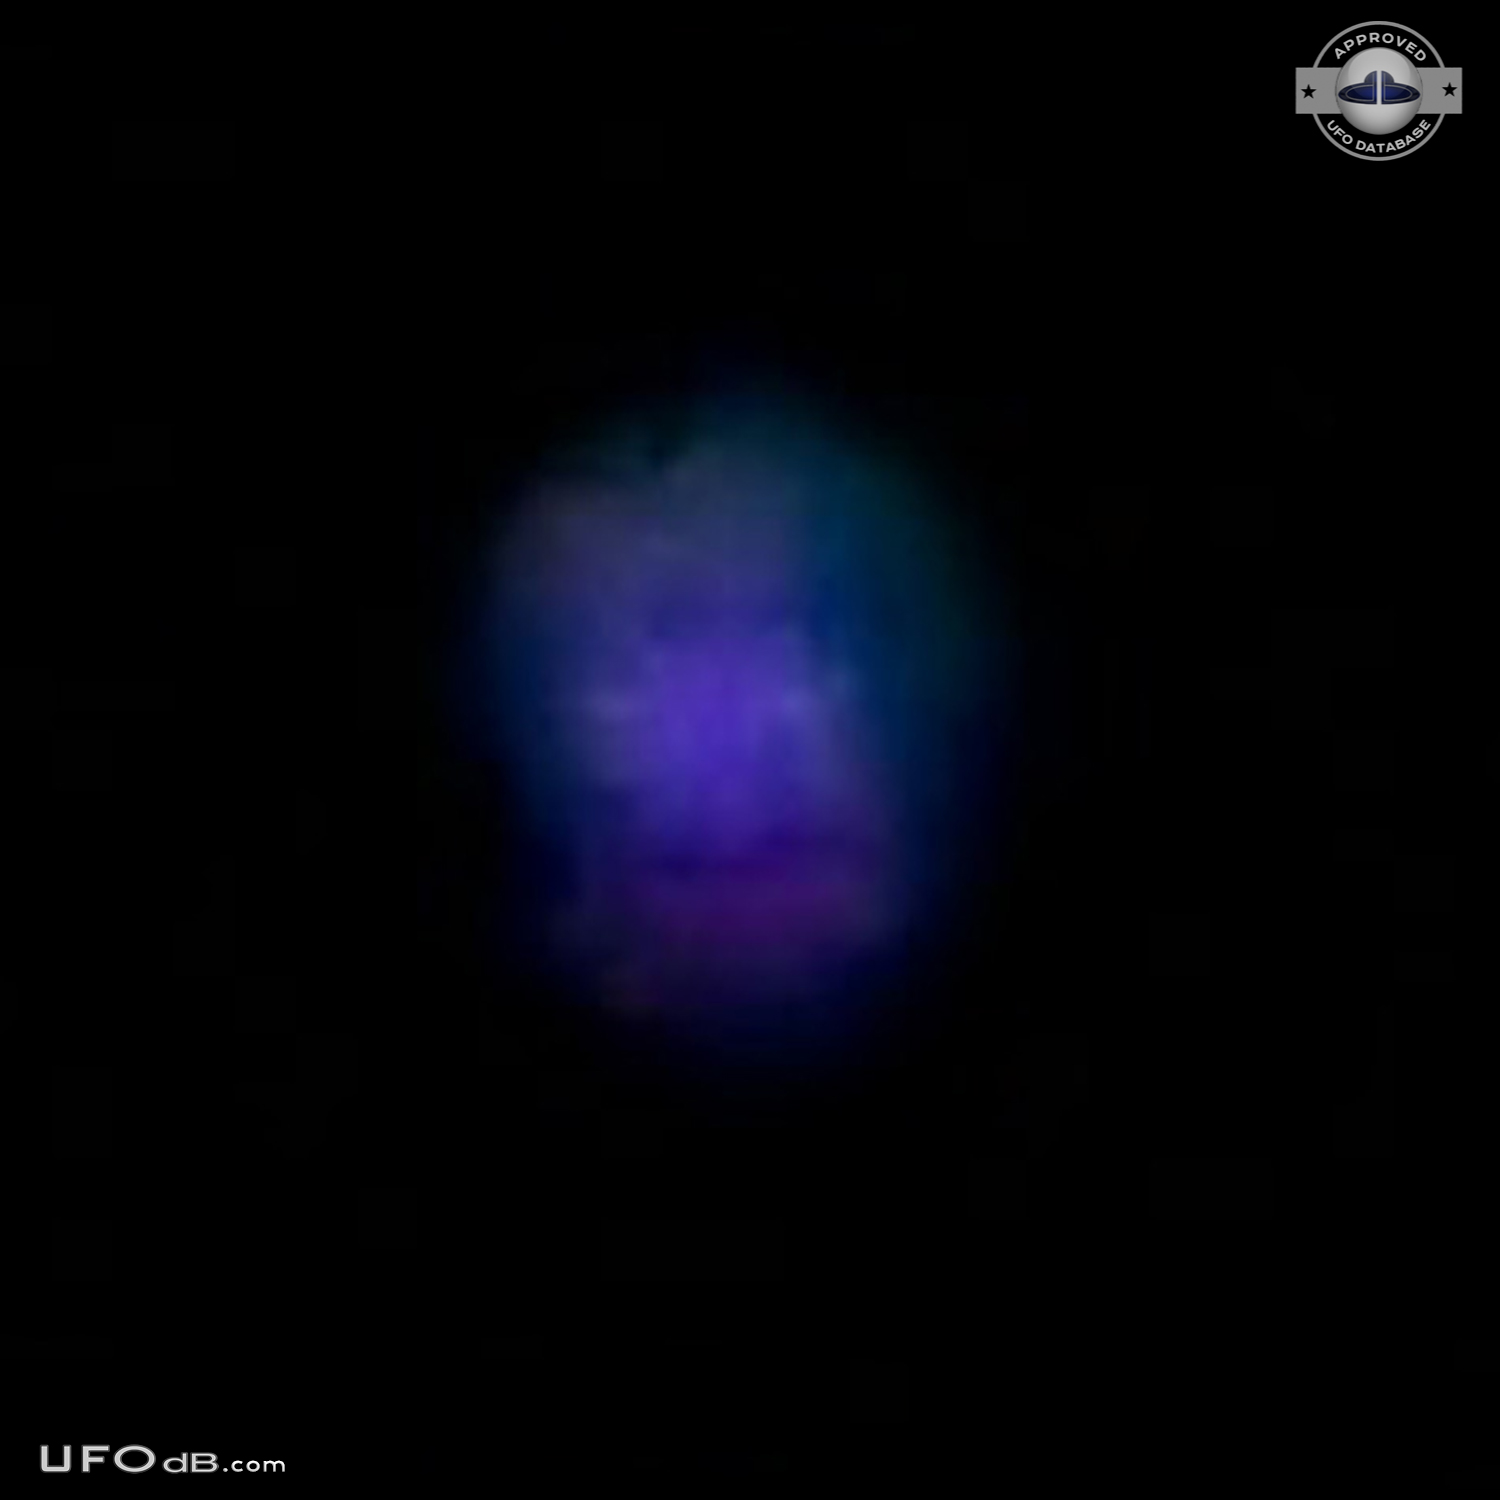 UFO Witness in Antrim New Hampshire unable to get video working - 2012 UFO Picture #527-2